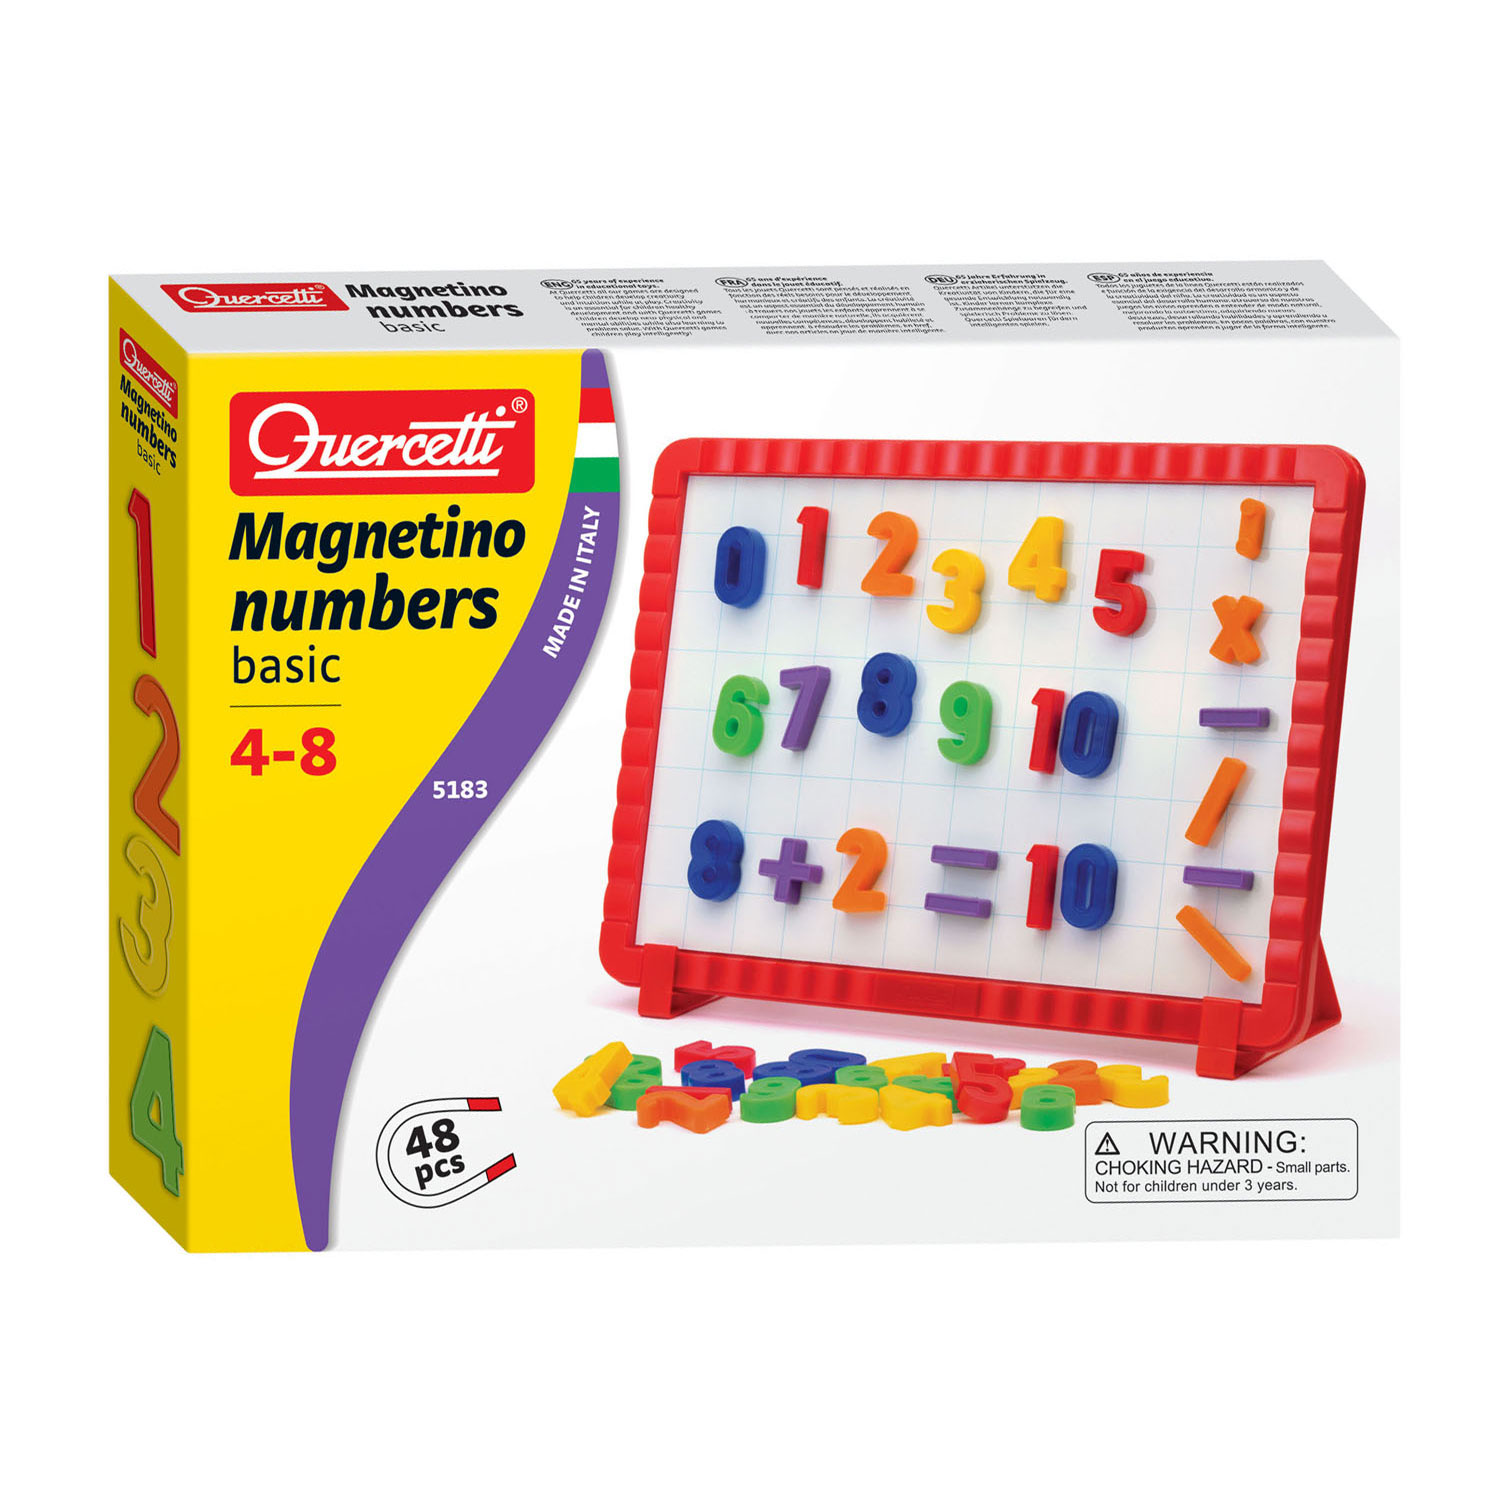 Quercetti Magneetbord Basic Nummers